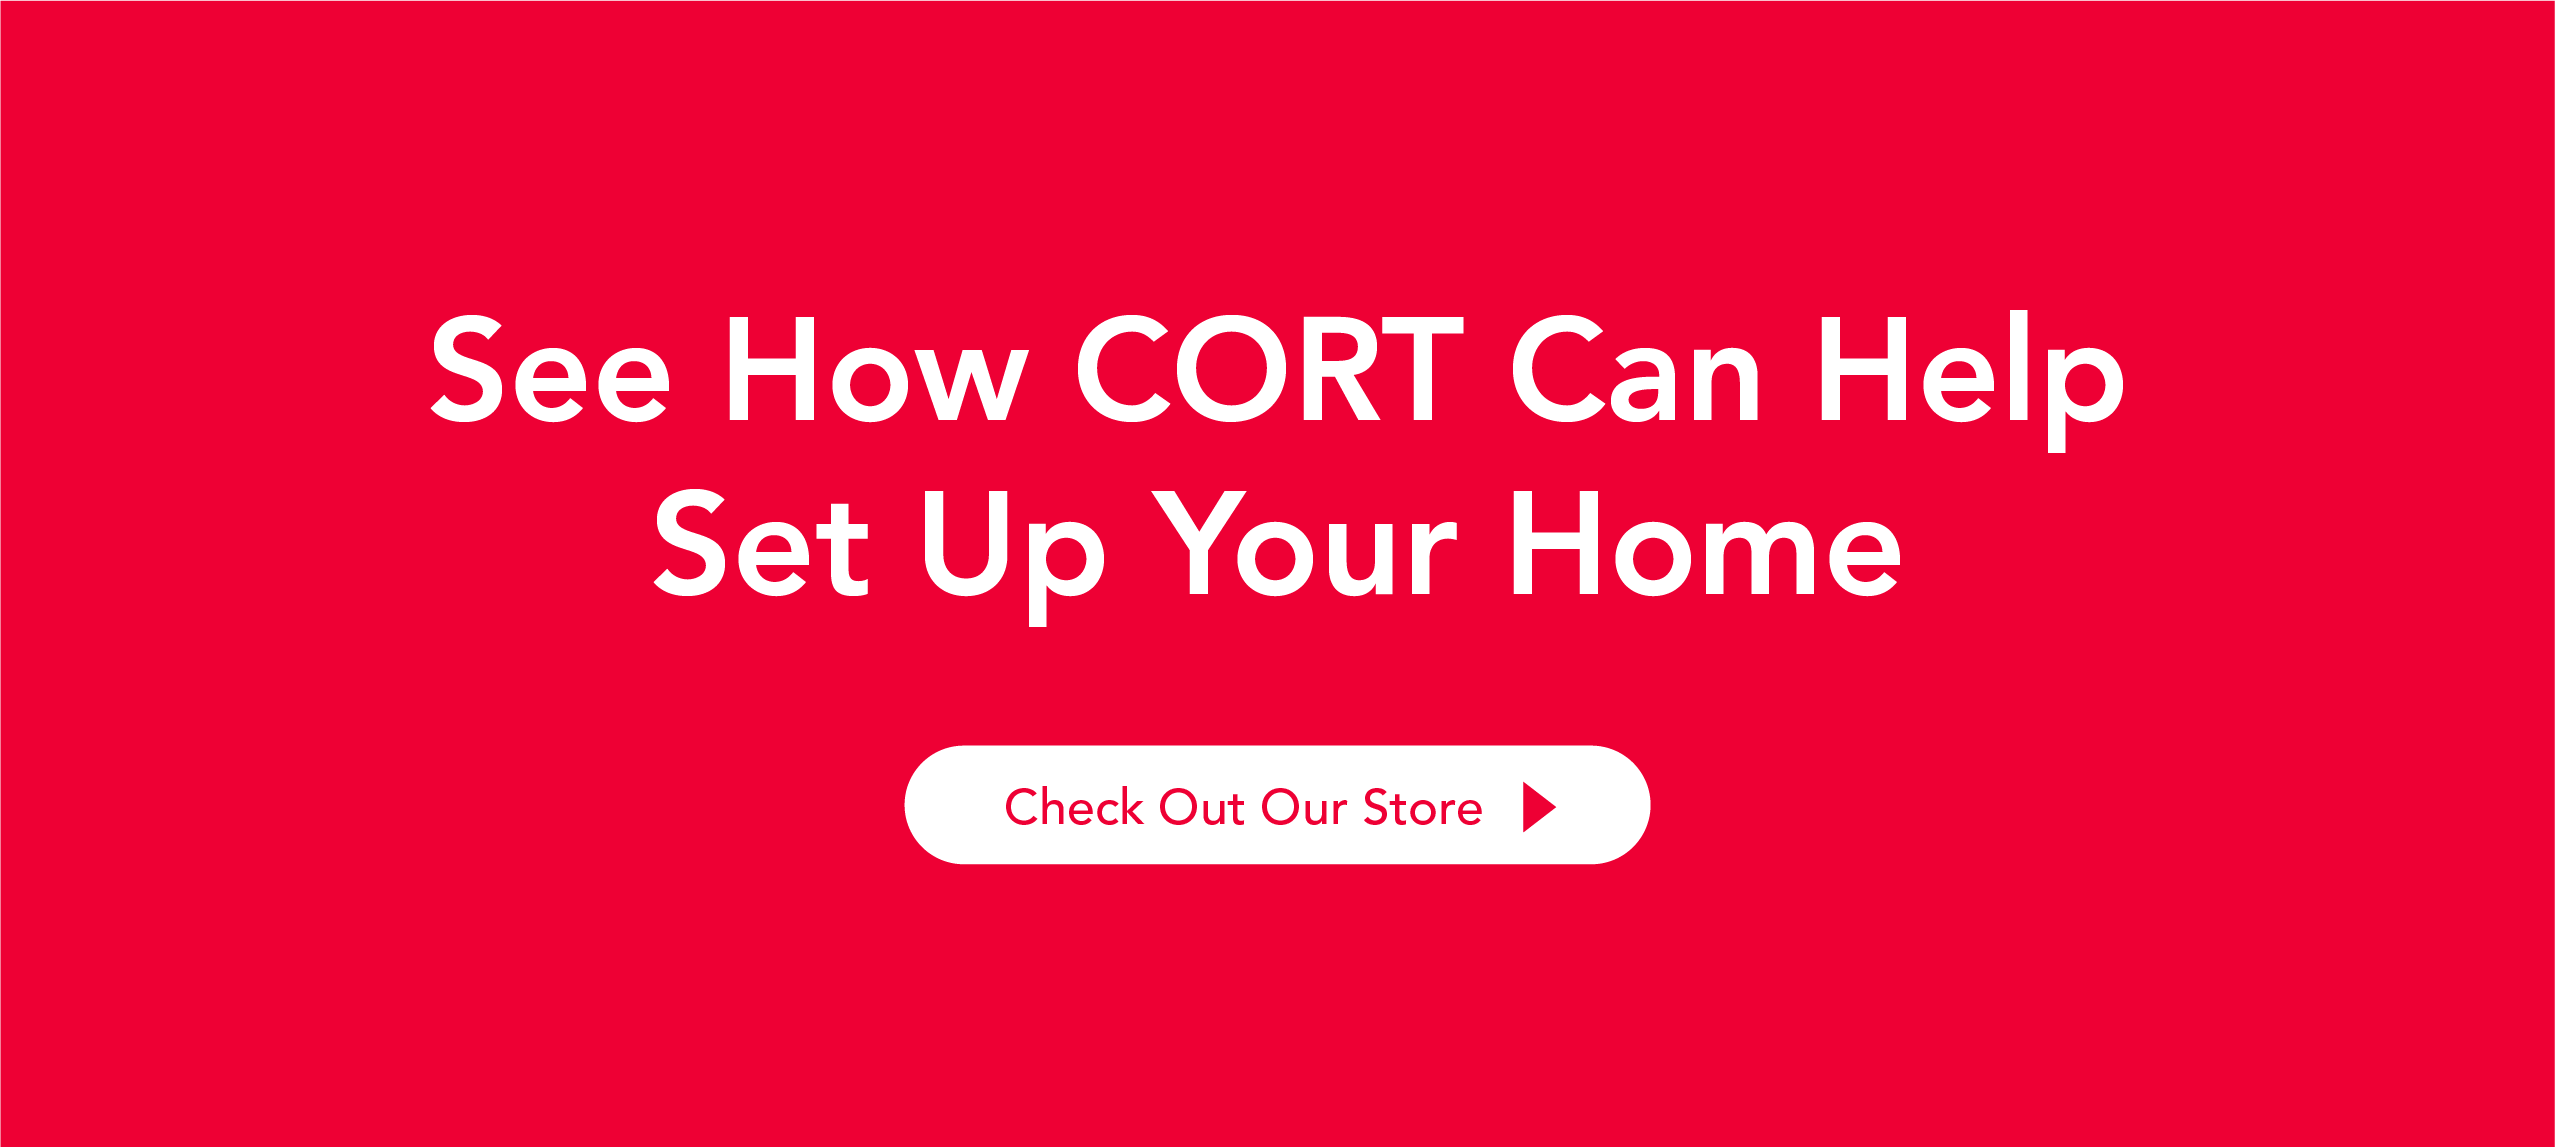 See how CORT can help you set up your home